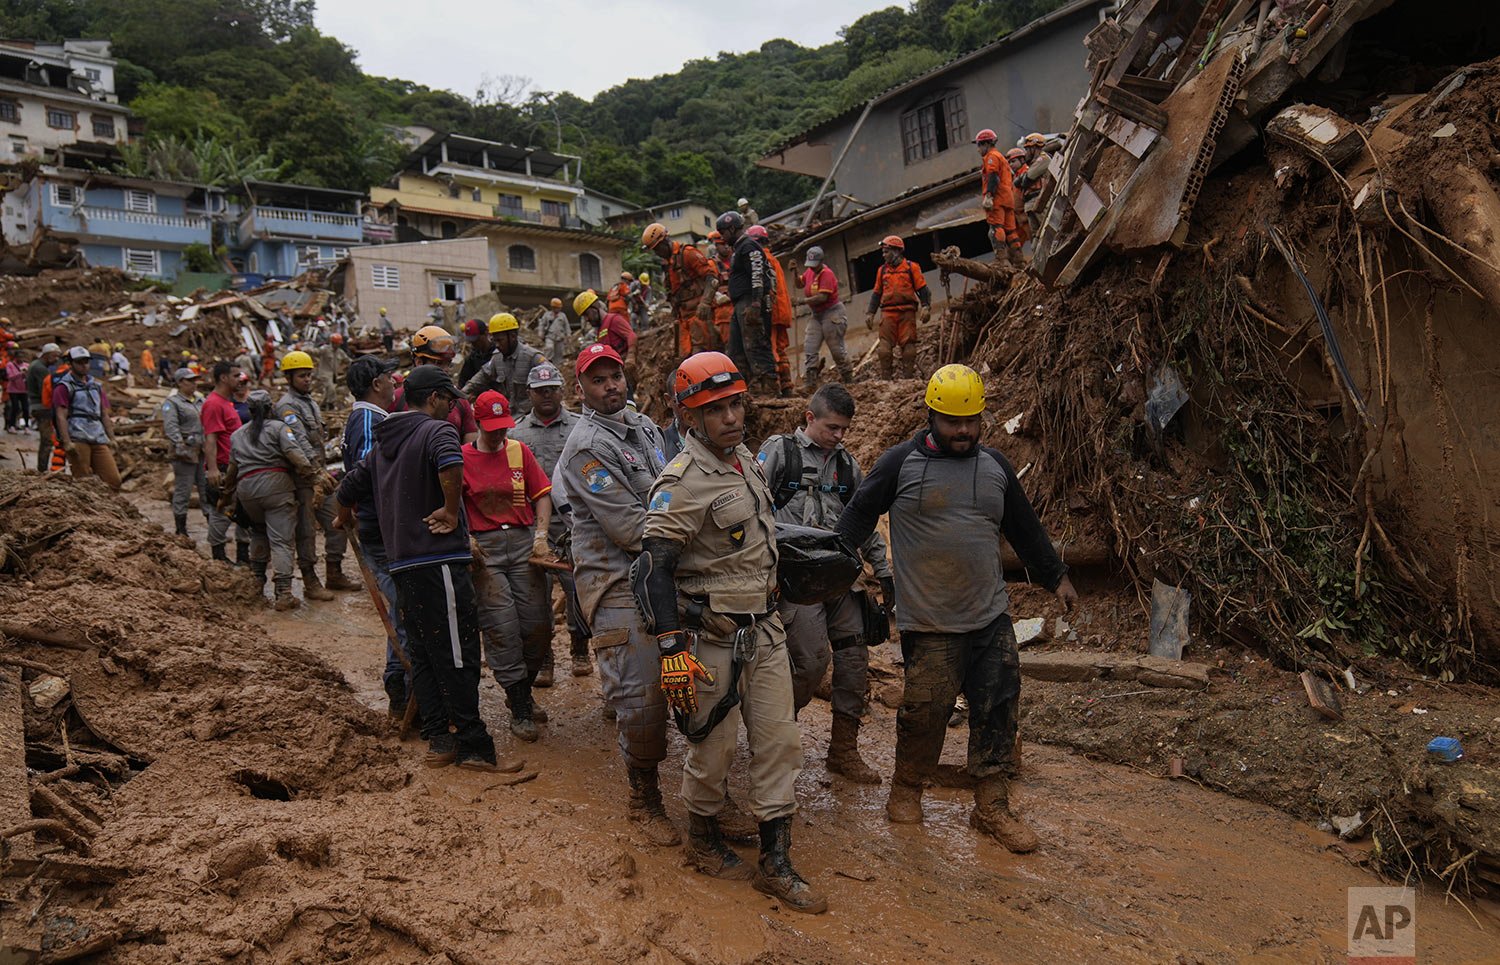  Rescue workers remove the body of a mudslide victim on the third day of rescue efforts in Petropolis, Brazil, Feb. 18, 2022. (AP Photo/Silvia Izquierdo) 